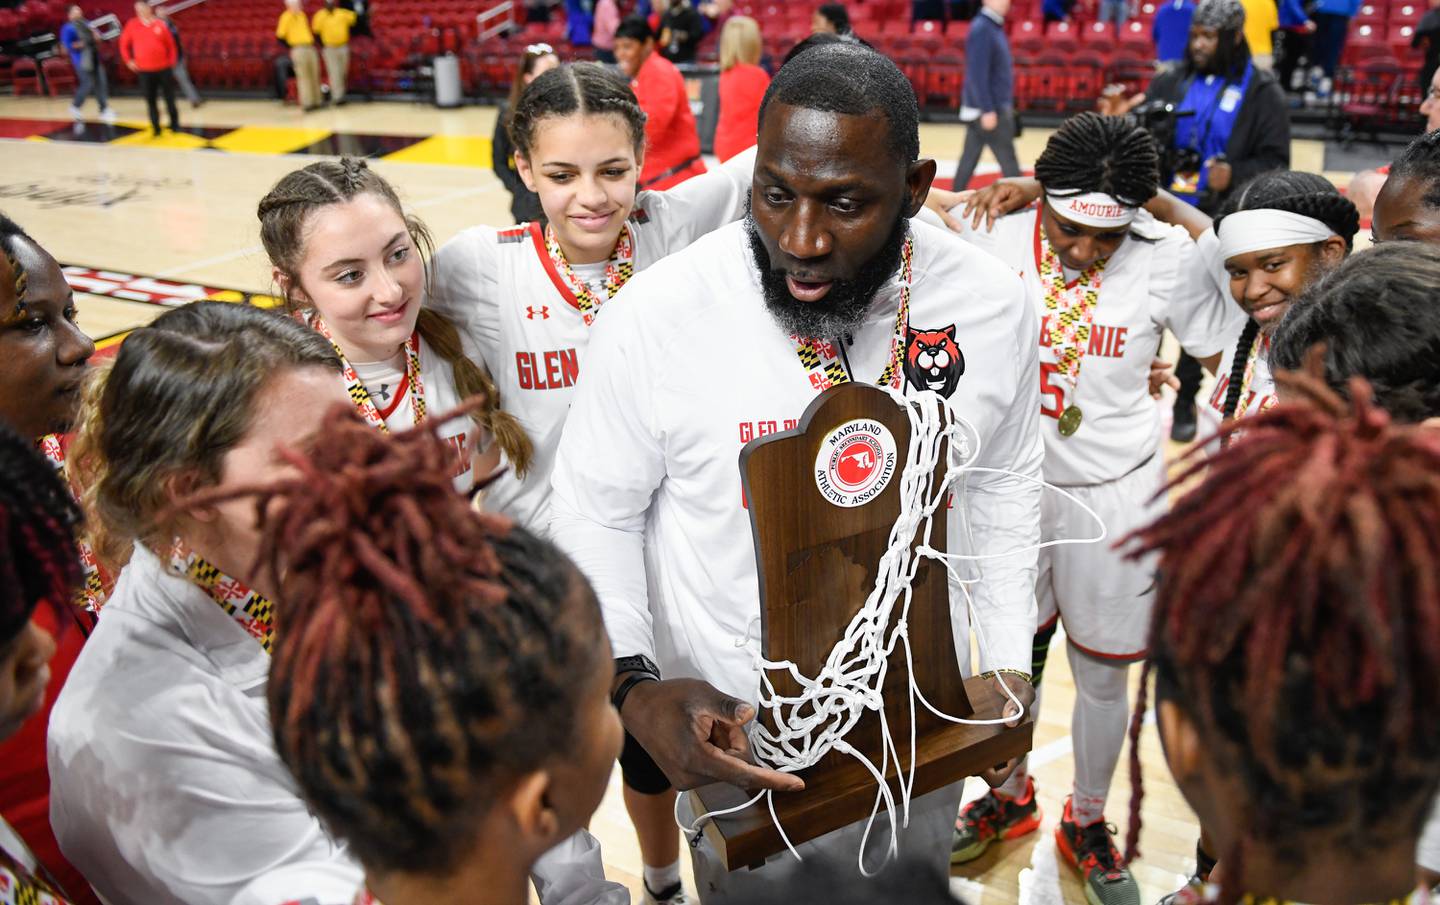 Glen Burnie head coach Sam Porter holds the Class 4A state girls basketball championship trophy as his team celebrates their 43-40 win against Churchill in College Park on Friday, March 10, 2023.